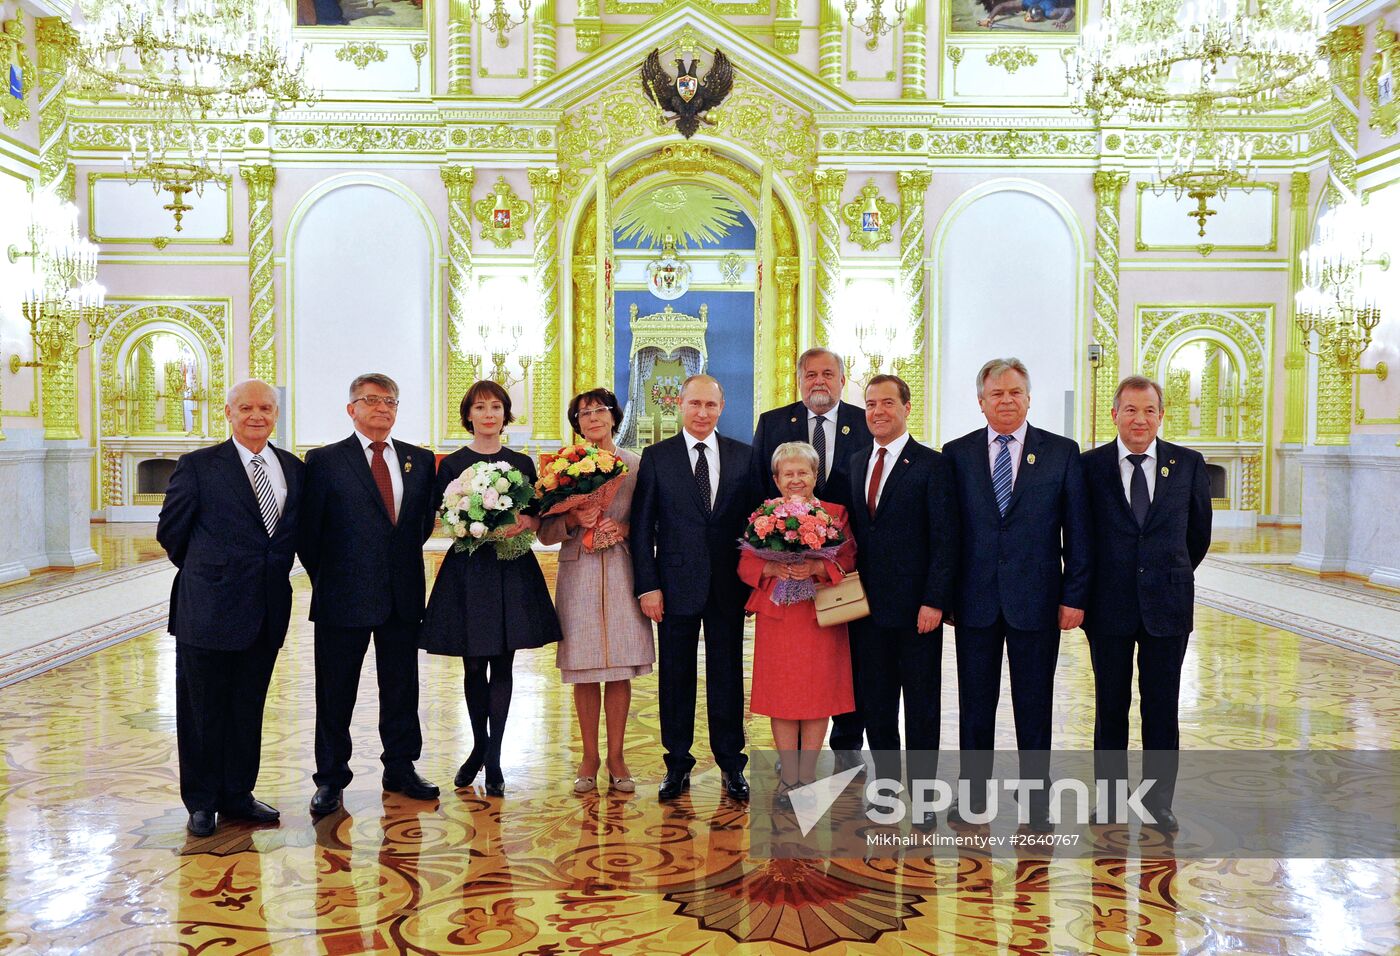 National awards presented on Russia Day in Kremlin